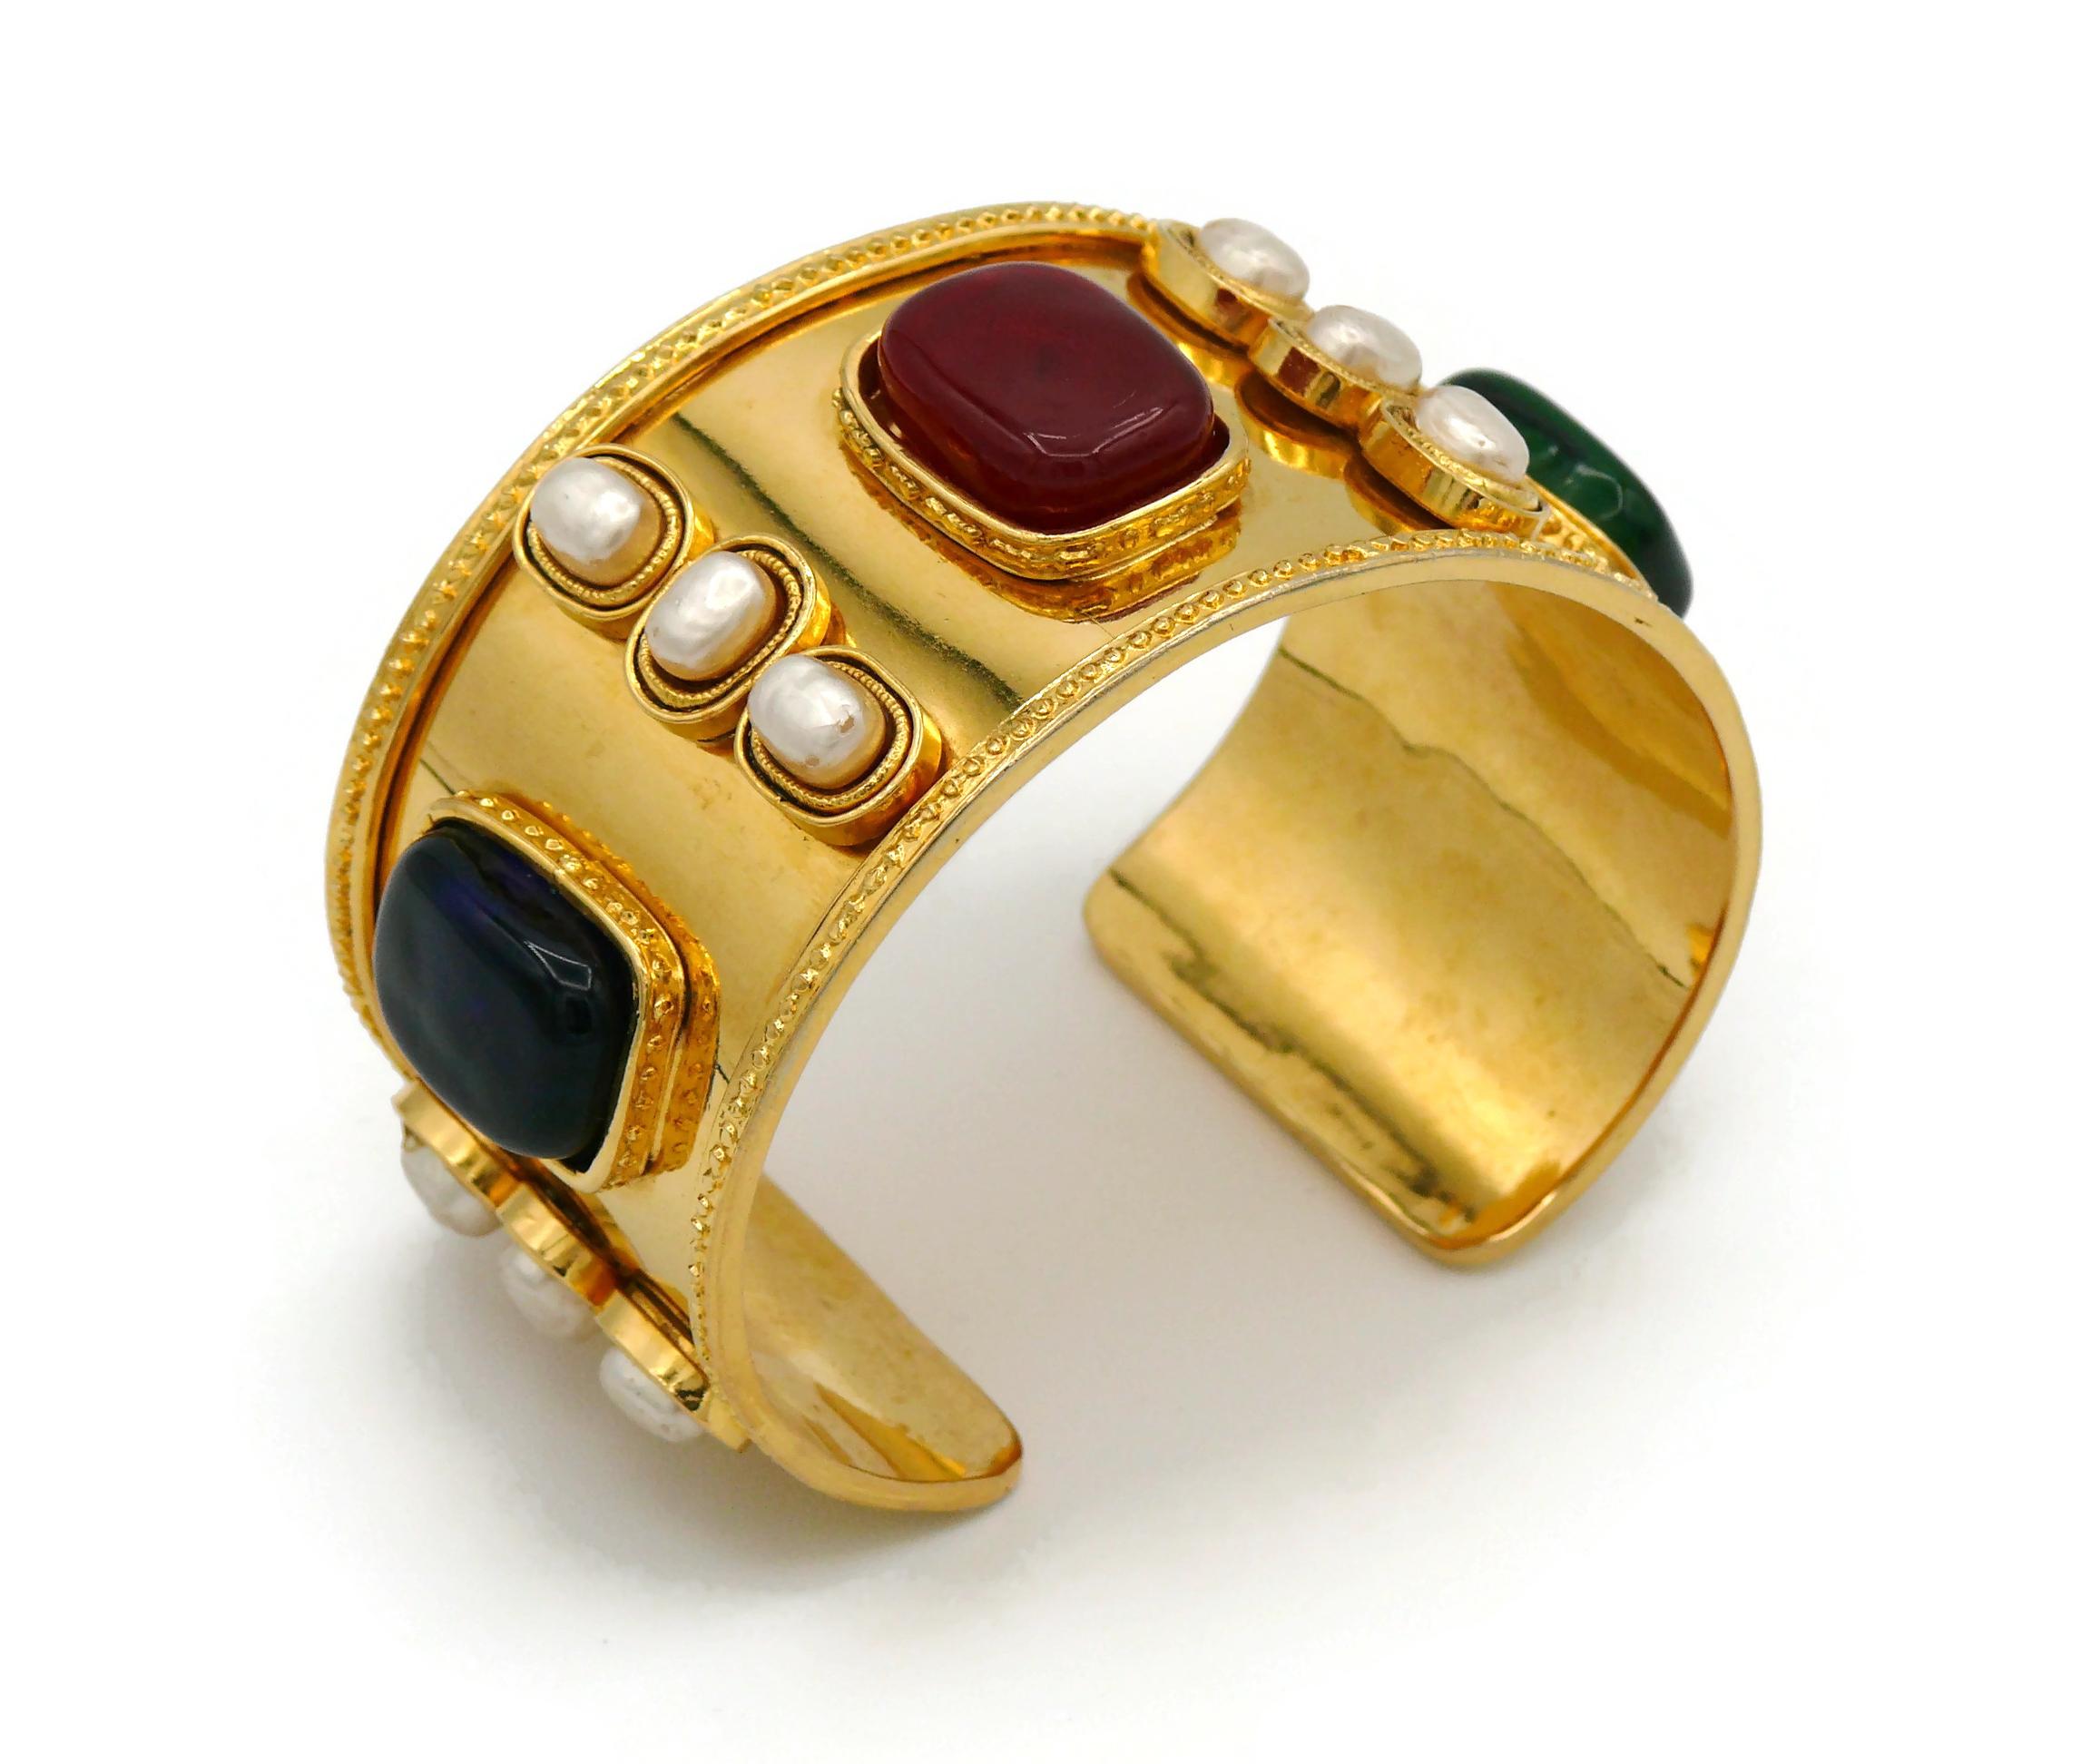 CHANEL Vintage Byzantine Inspired Gripoix Cuff Bracelet, 1990 In Fair Condition For Sale In Nice, FR